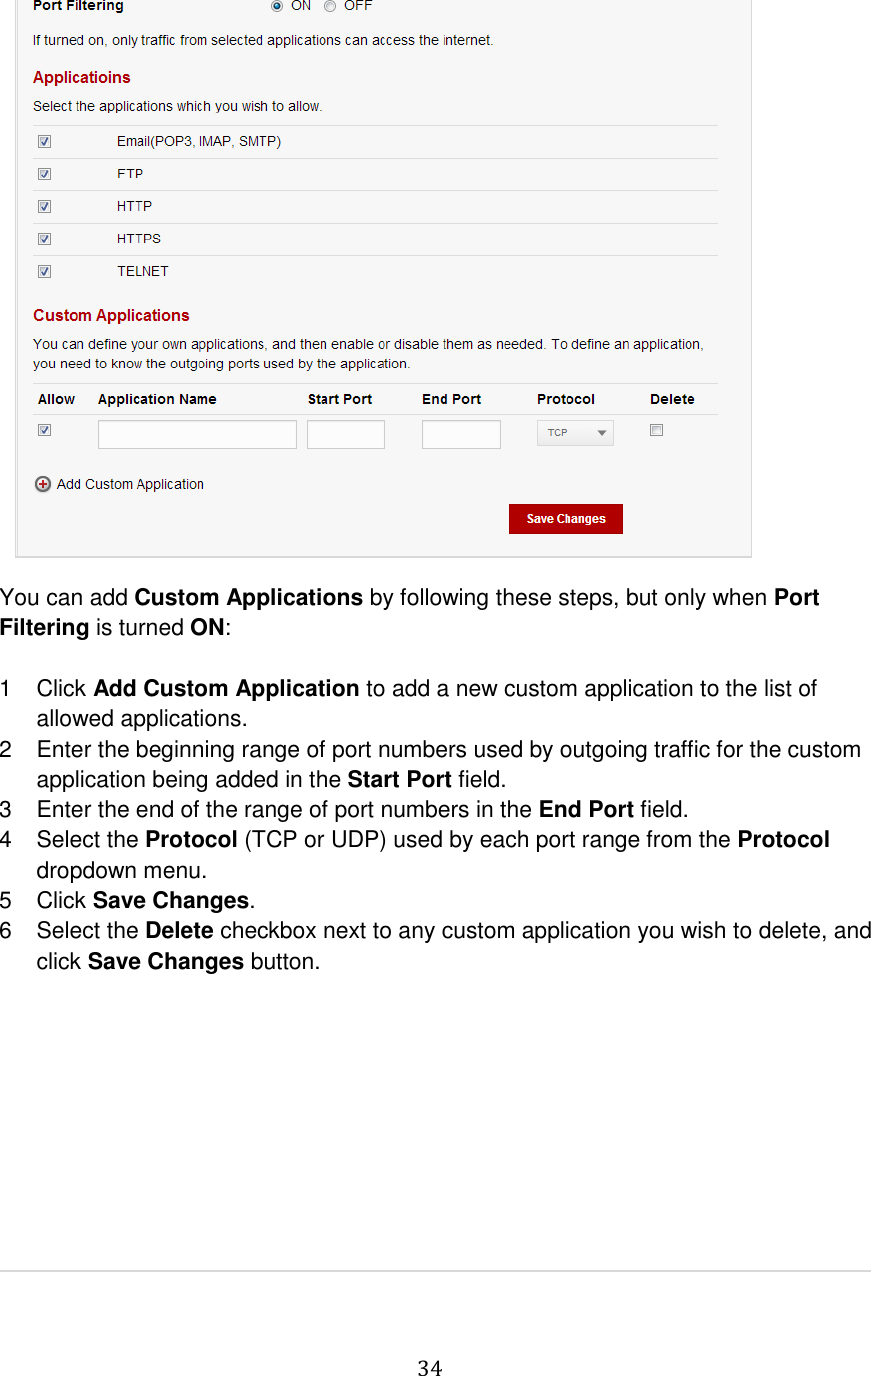   34                   You can add Custom Applications by following these steps, but only when Port Filtering is turned ON:  1  Click Add Custom Application to add a new custom application to the list of allowed applications.  2  Enter the beginning range of port numbers used by outgoing traffic for the custom application being added in the Start Port field. 3  Enter the end of the range of port numbers in the End Port field.  4  Select the Protocol (TCP or UDP) used by each port range from the Protocol dropdown menu. 5  Click Save Changes. 6  Select the Delete checkbox next to any custom application you wish to delete, and click Save Changes button.         